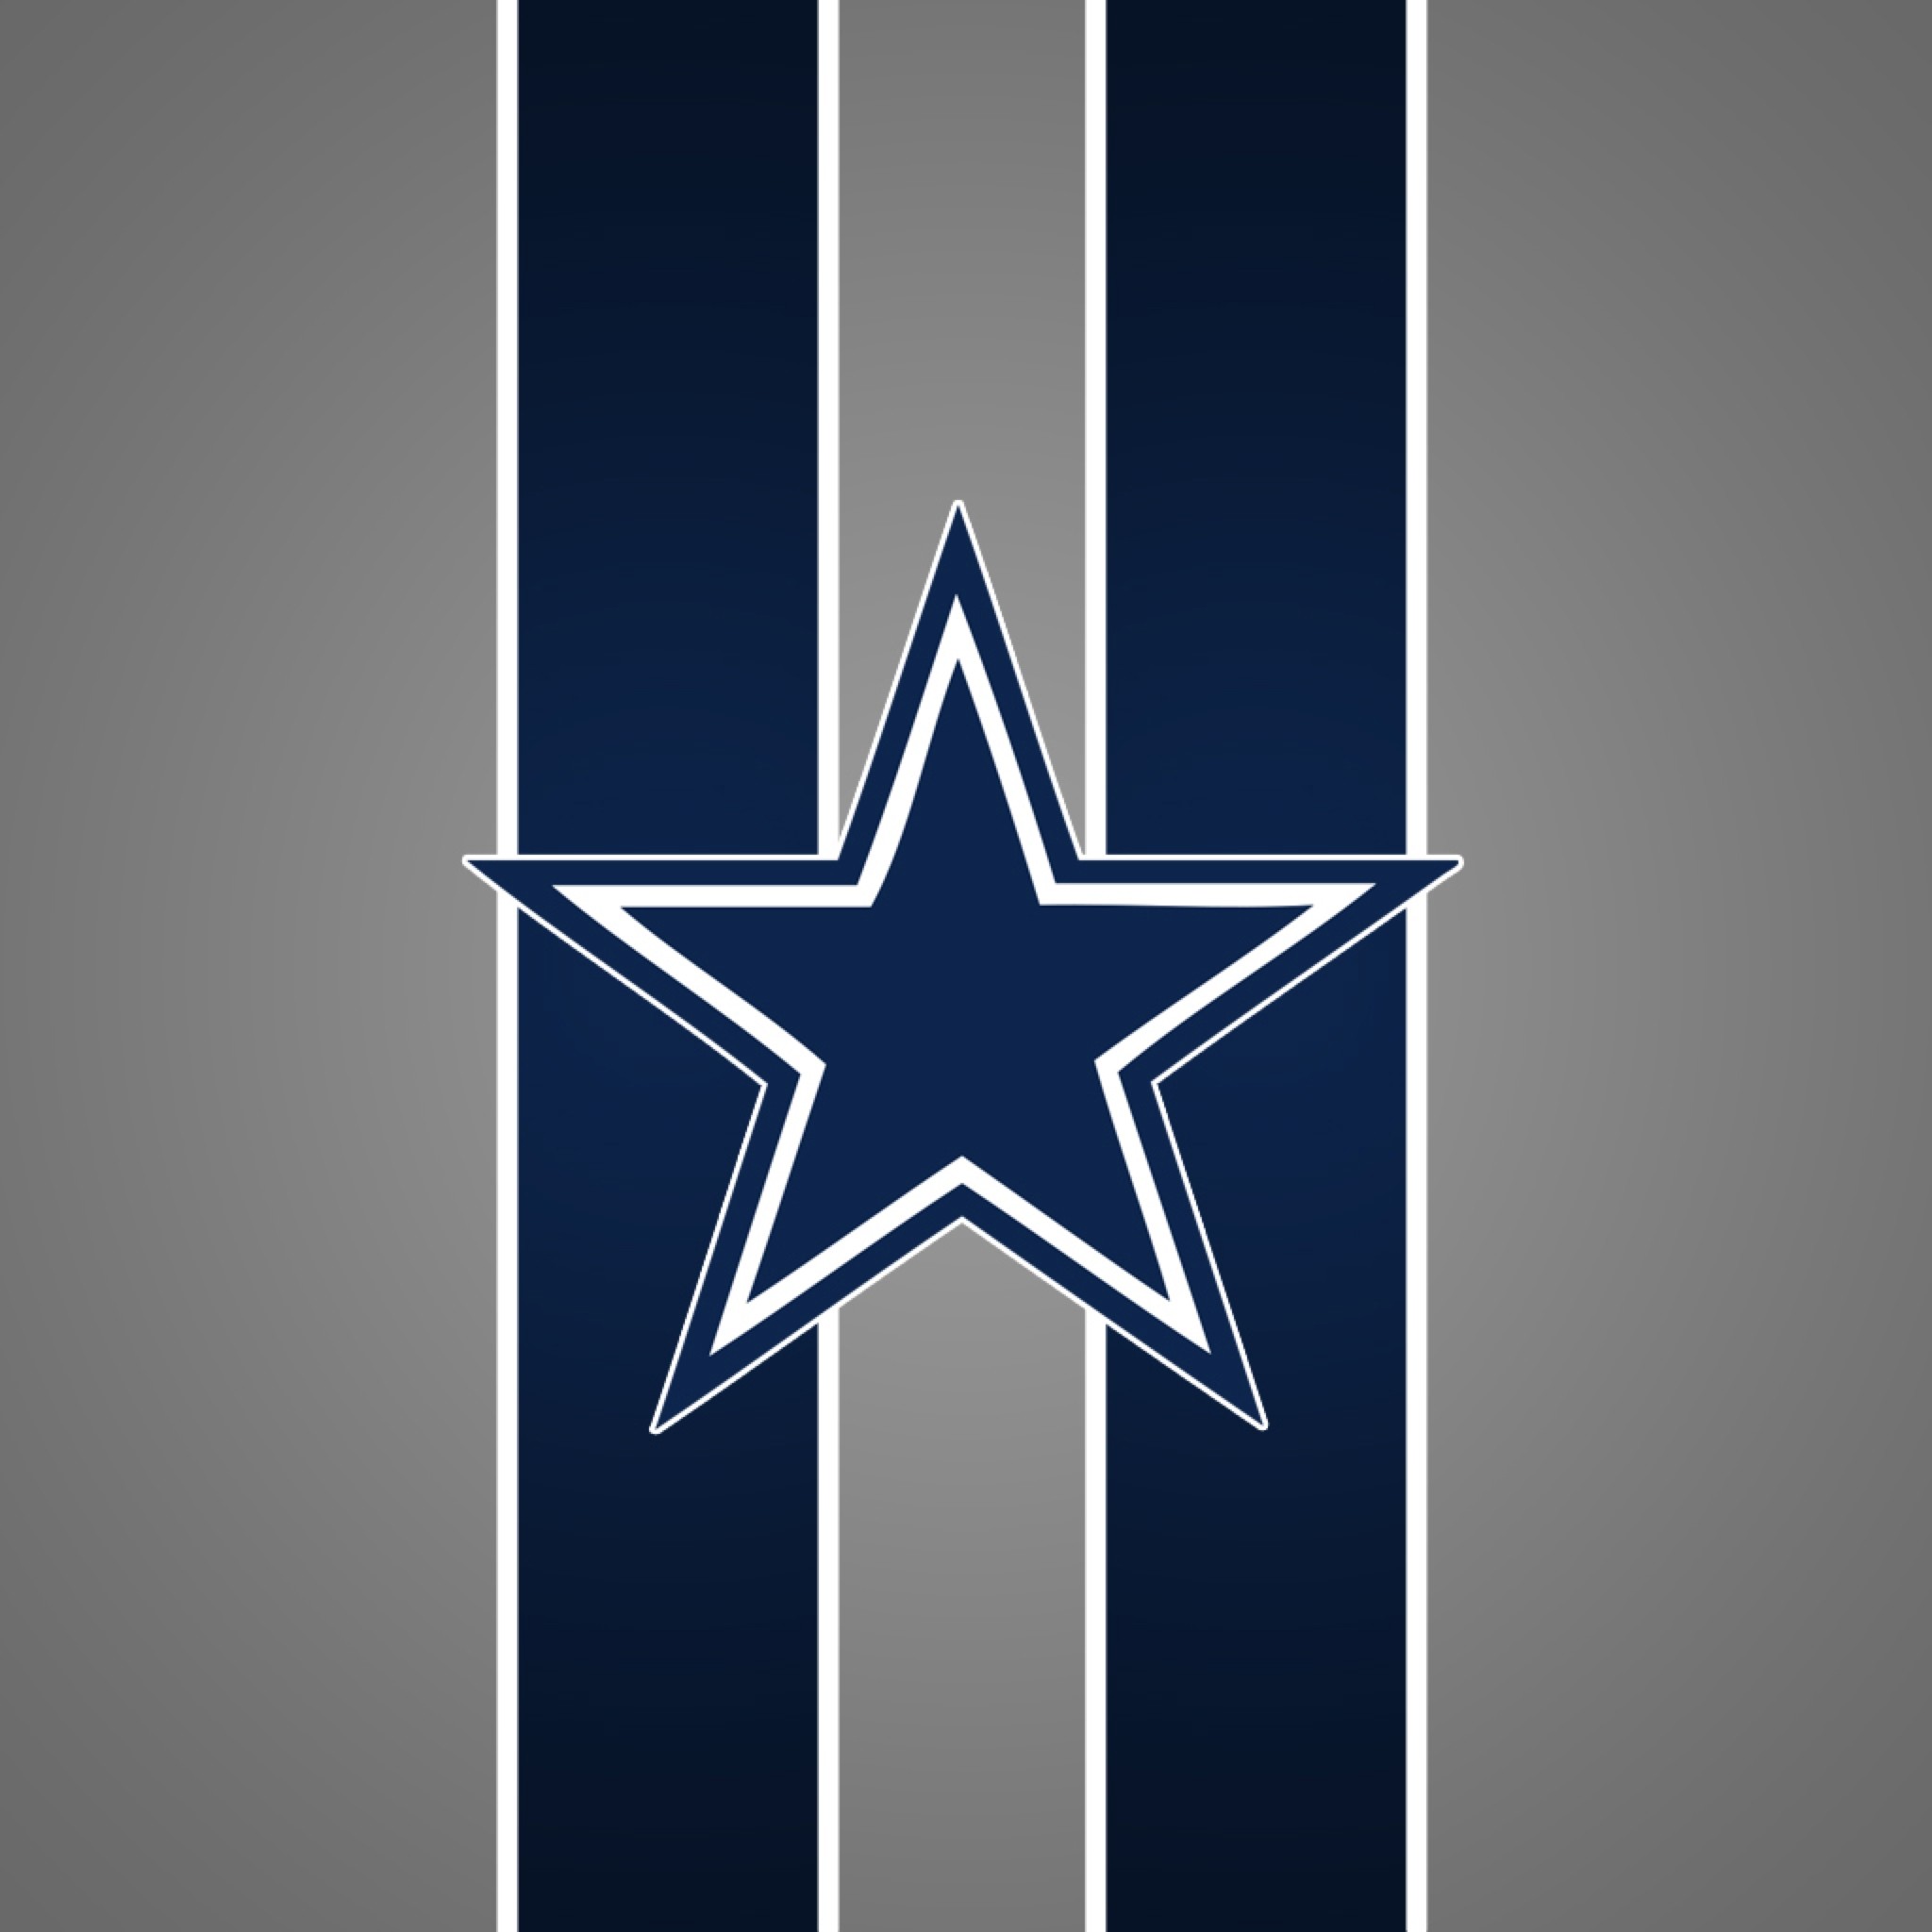 Download Star Patterns On Banner Of Dallas Cowboys Iphone Wallpaper   Wallpaperscom